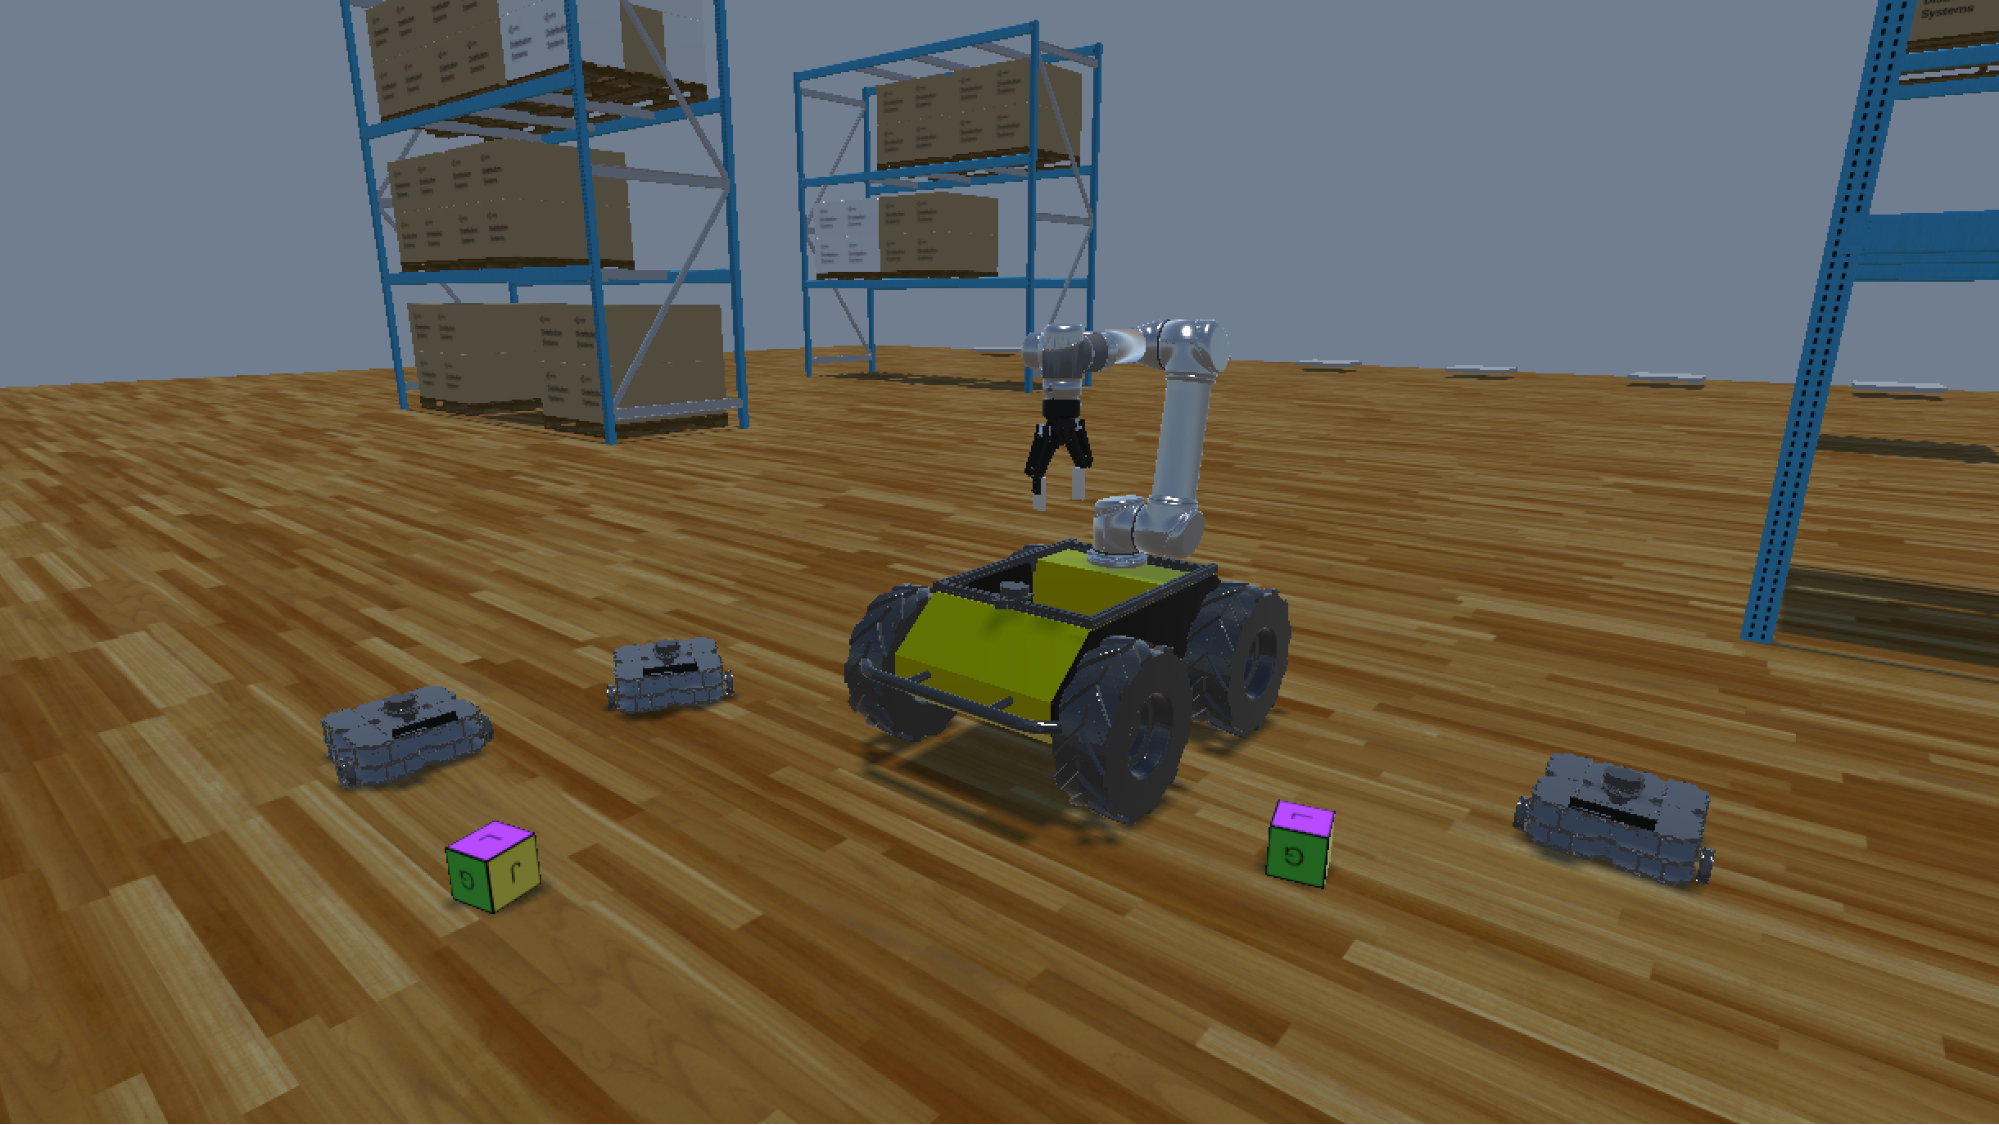 3D simulation of a green robot moving around a wood floor 